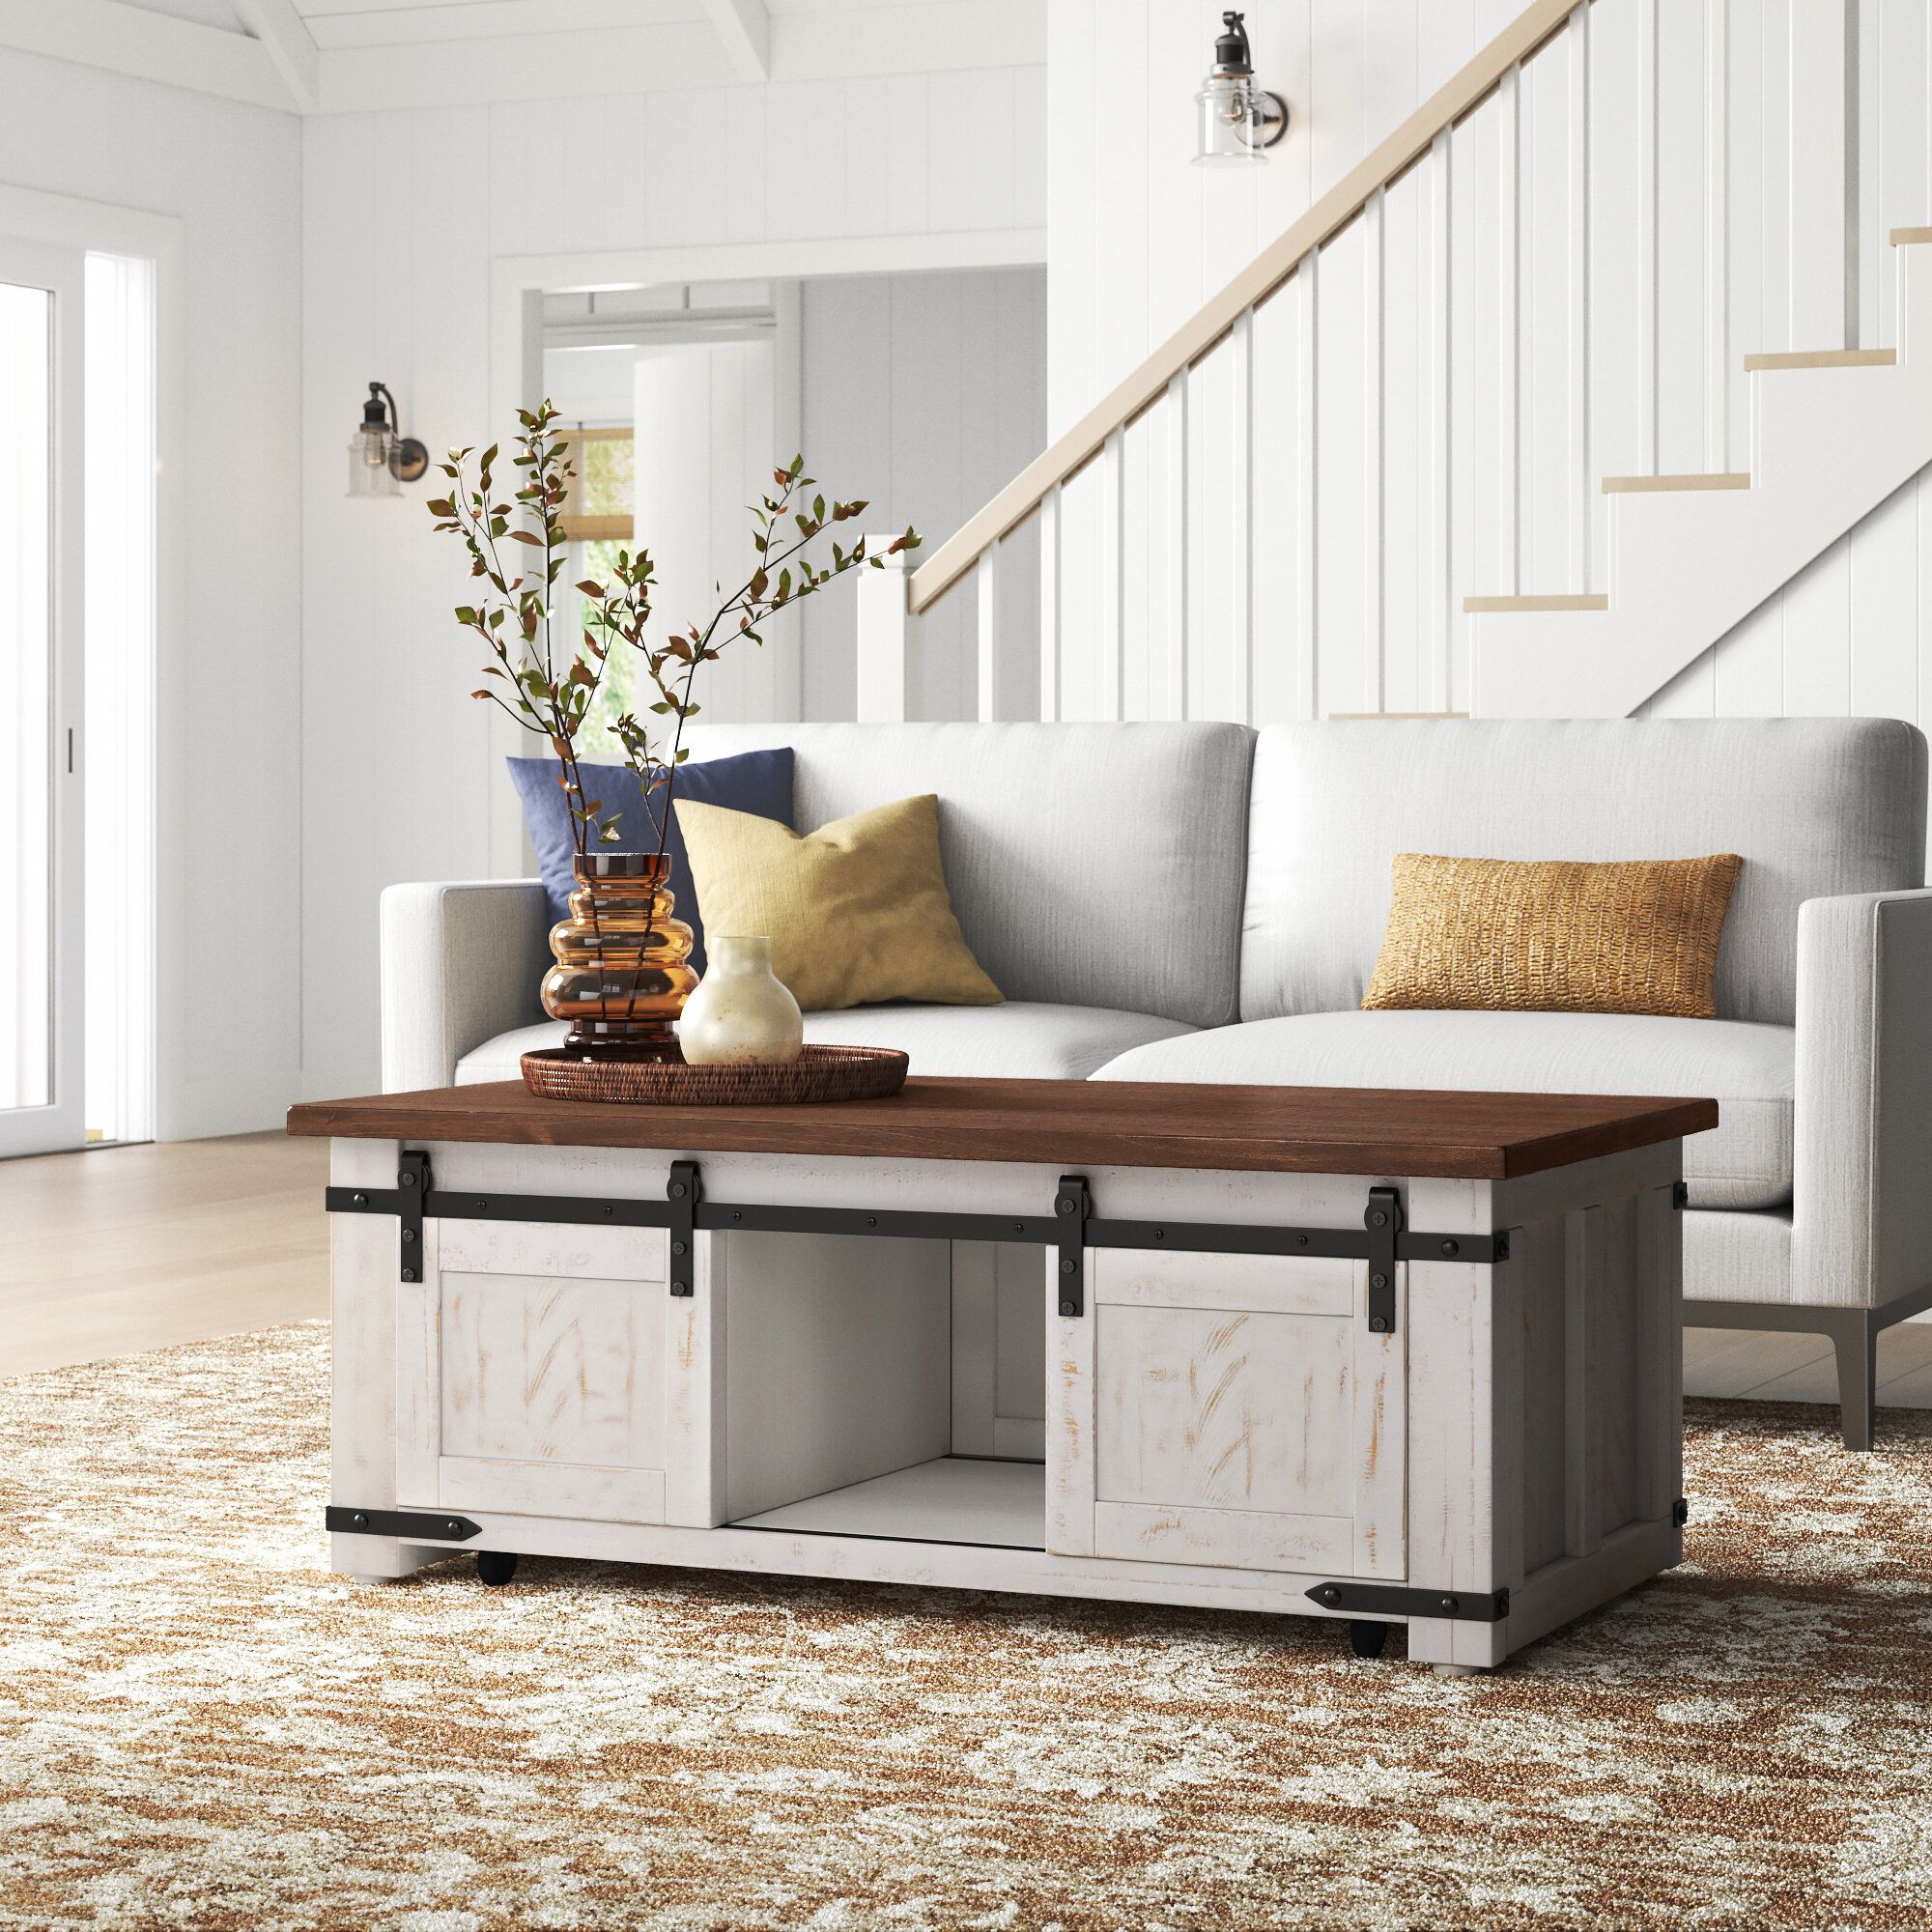 Sand & Stable Sean Coffee Table & Reviews | Wayfair With Regard To Coffee Tables With Sliding Barn Doors (View 9 of 15)